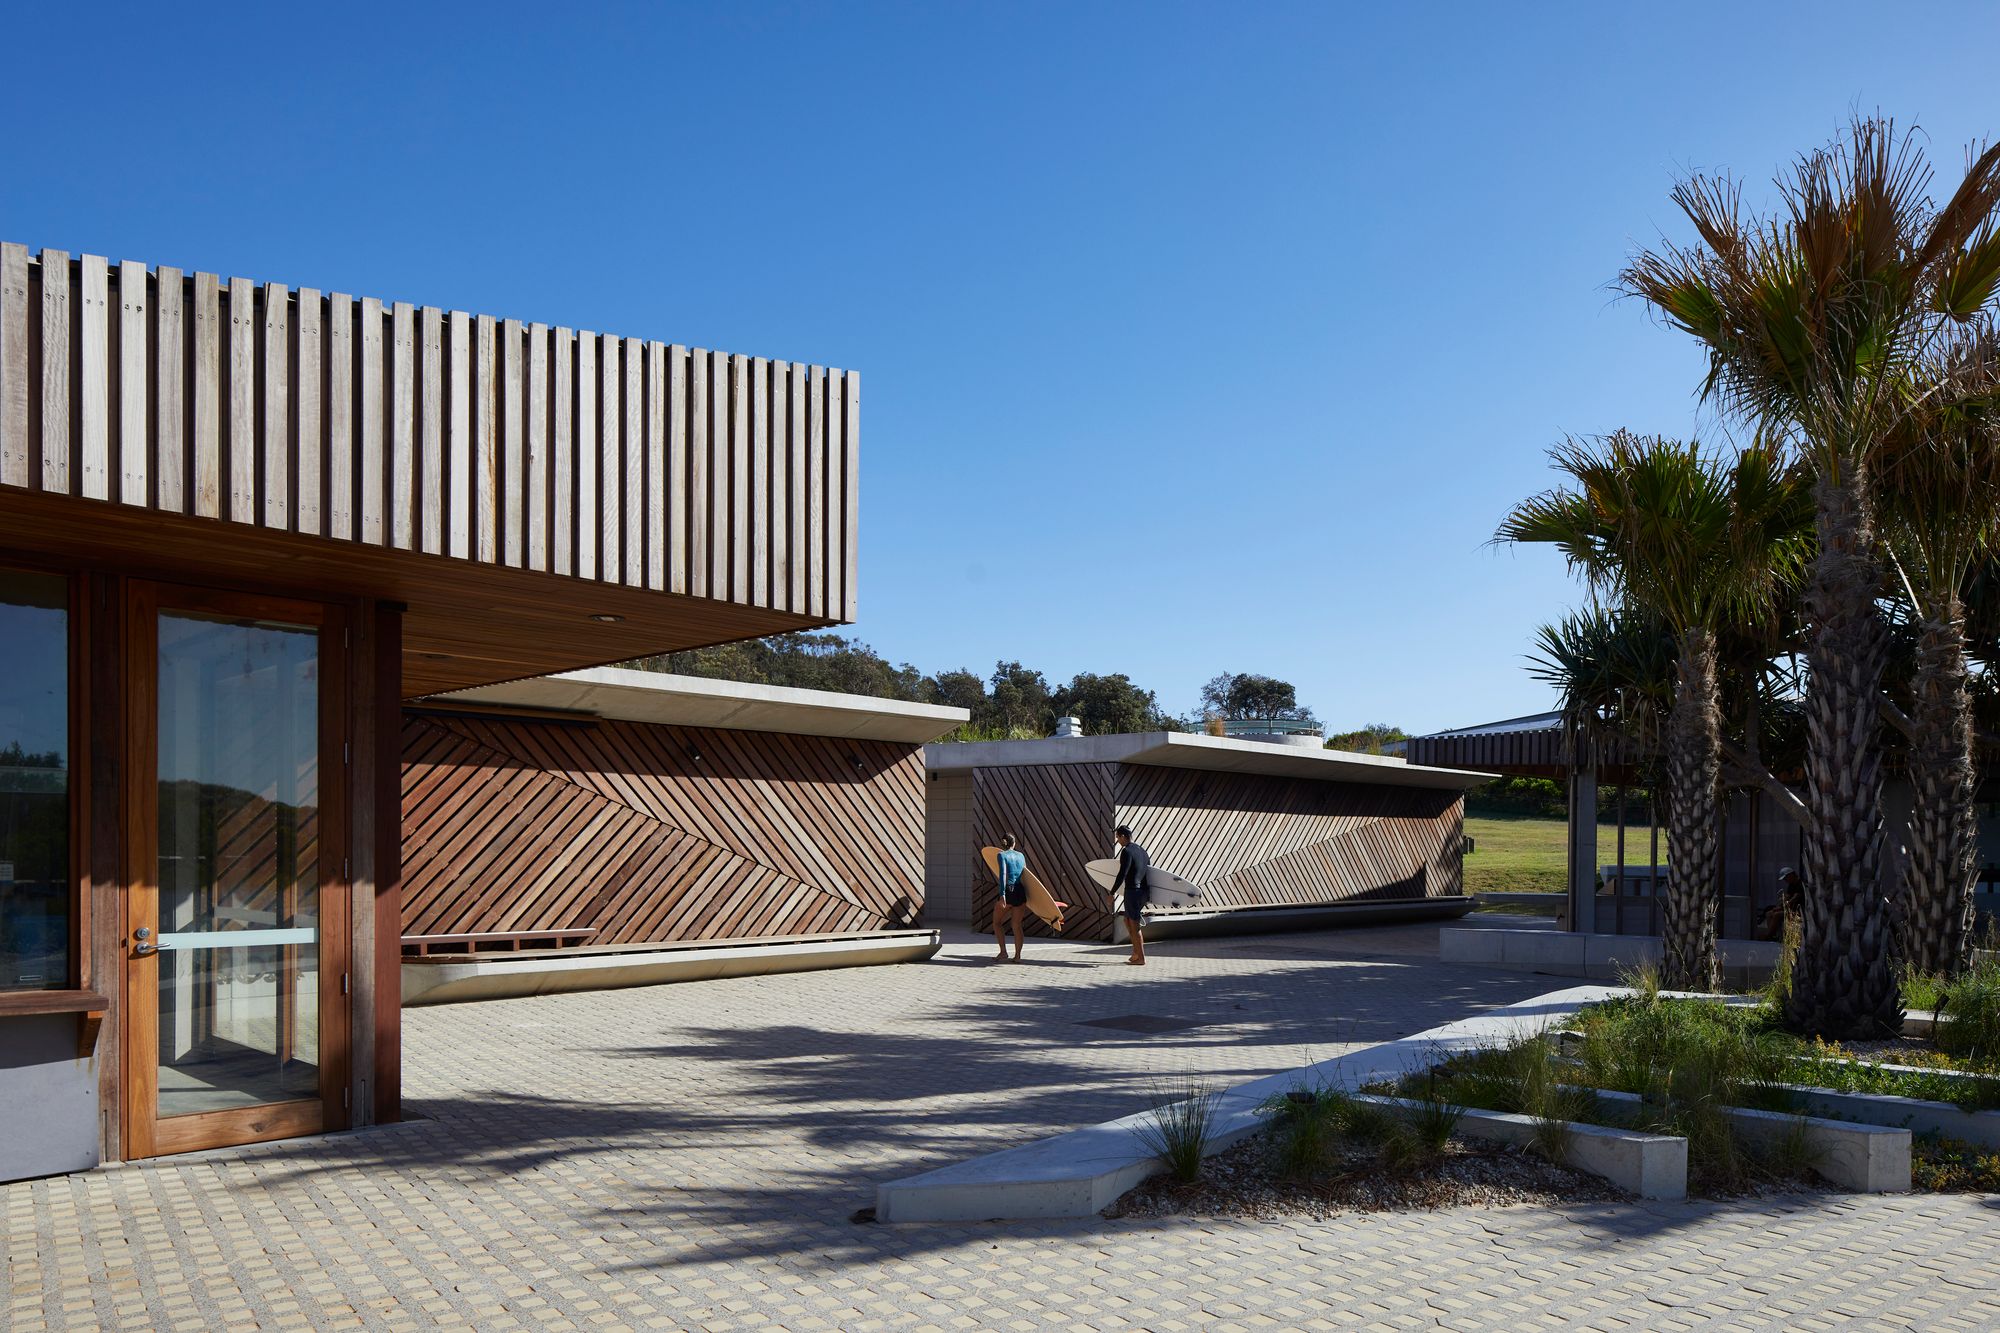 Long Reef SLSC by Adriano Pupilli Architects showing exterior of building